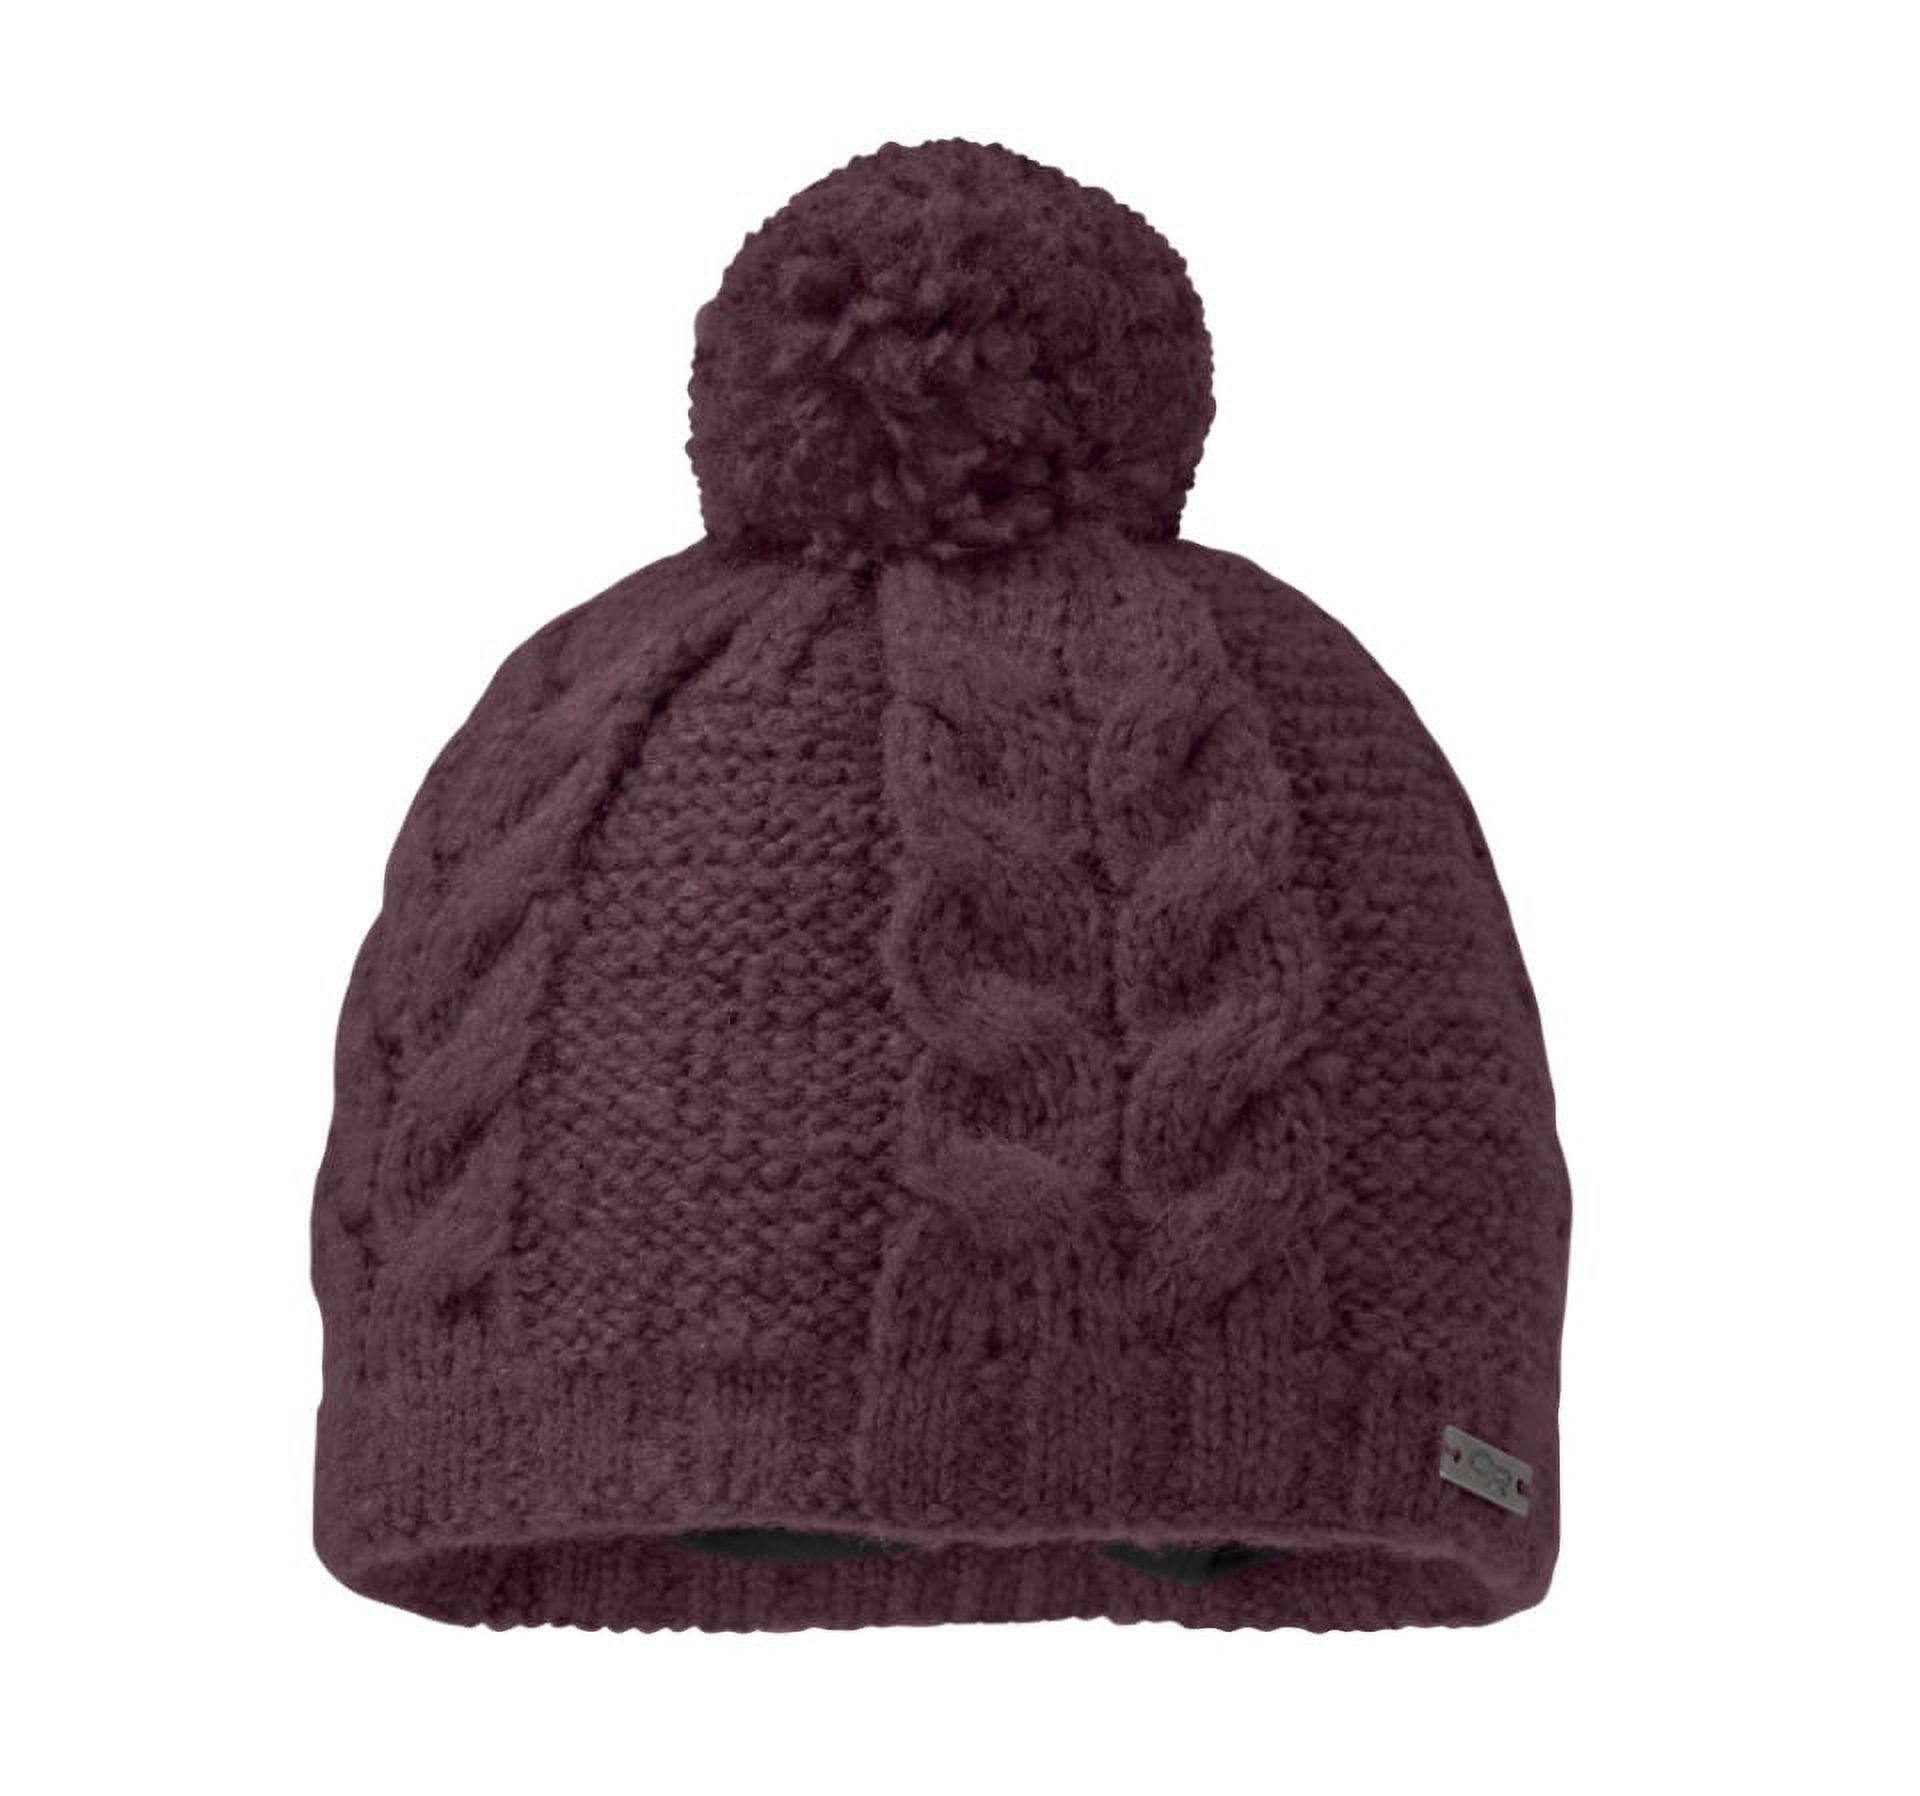 Outdoor Research OR Pinball Womens Hat Pinot OneSize - image 1 of 1